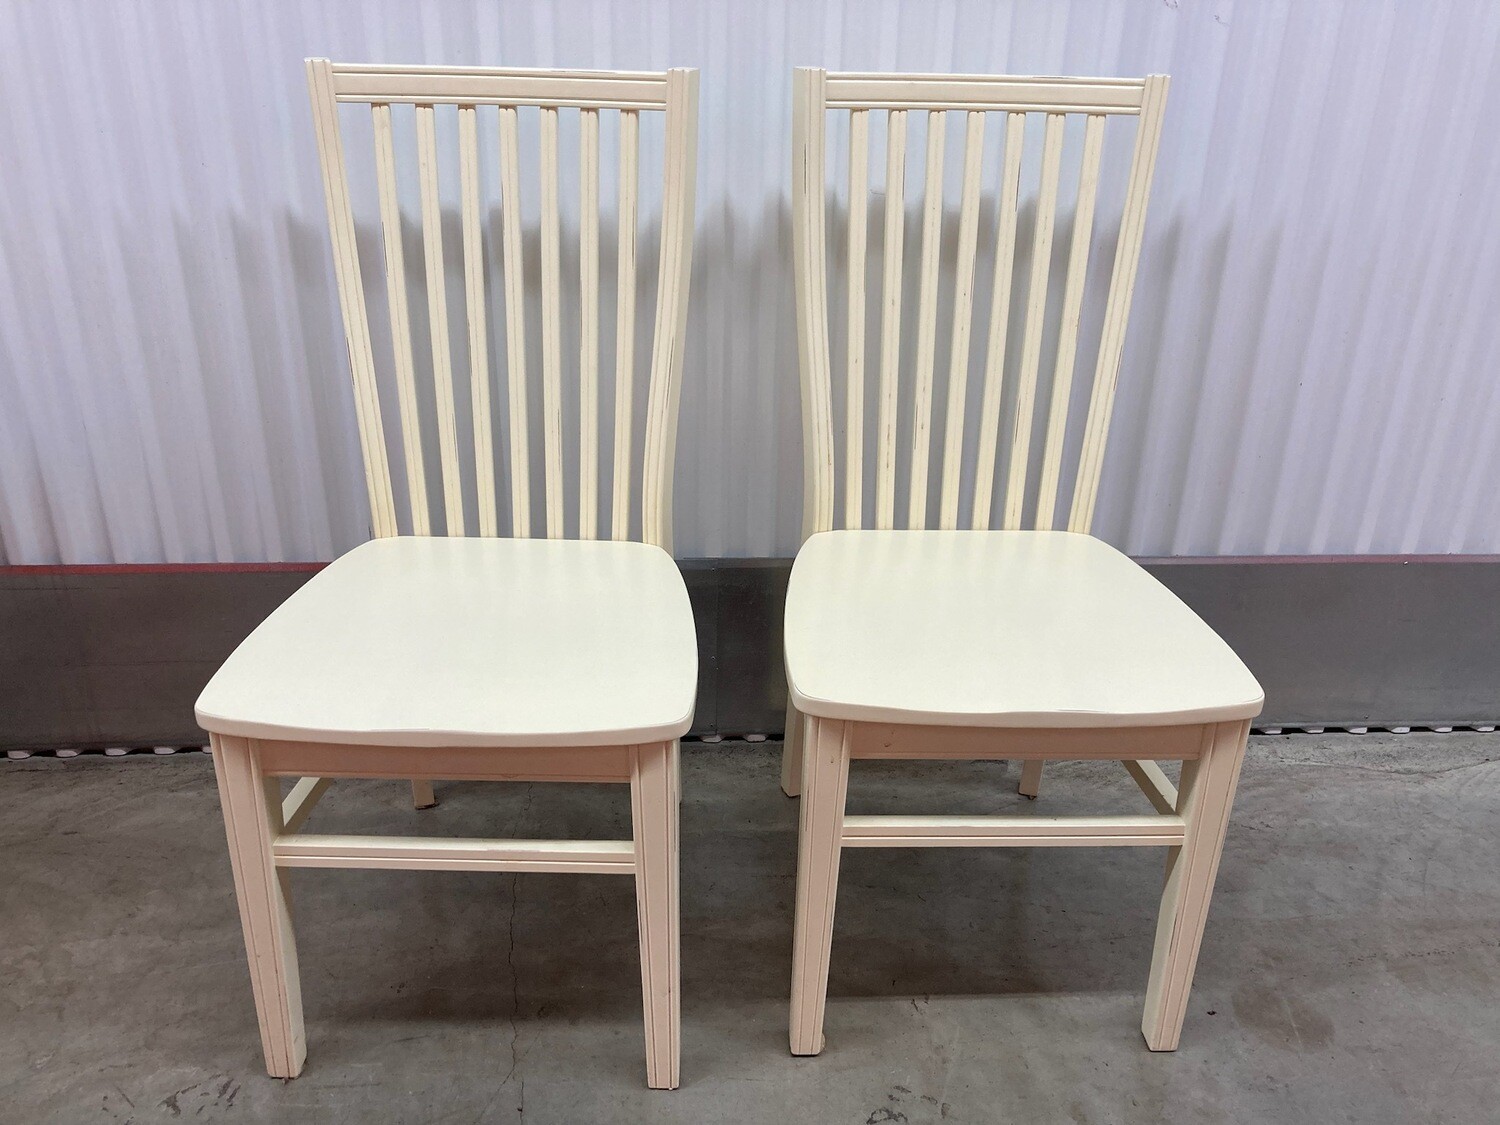 Pair of Pier 1 Chairs, distressed look #2114